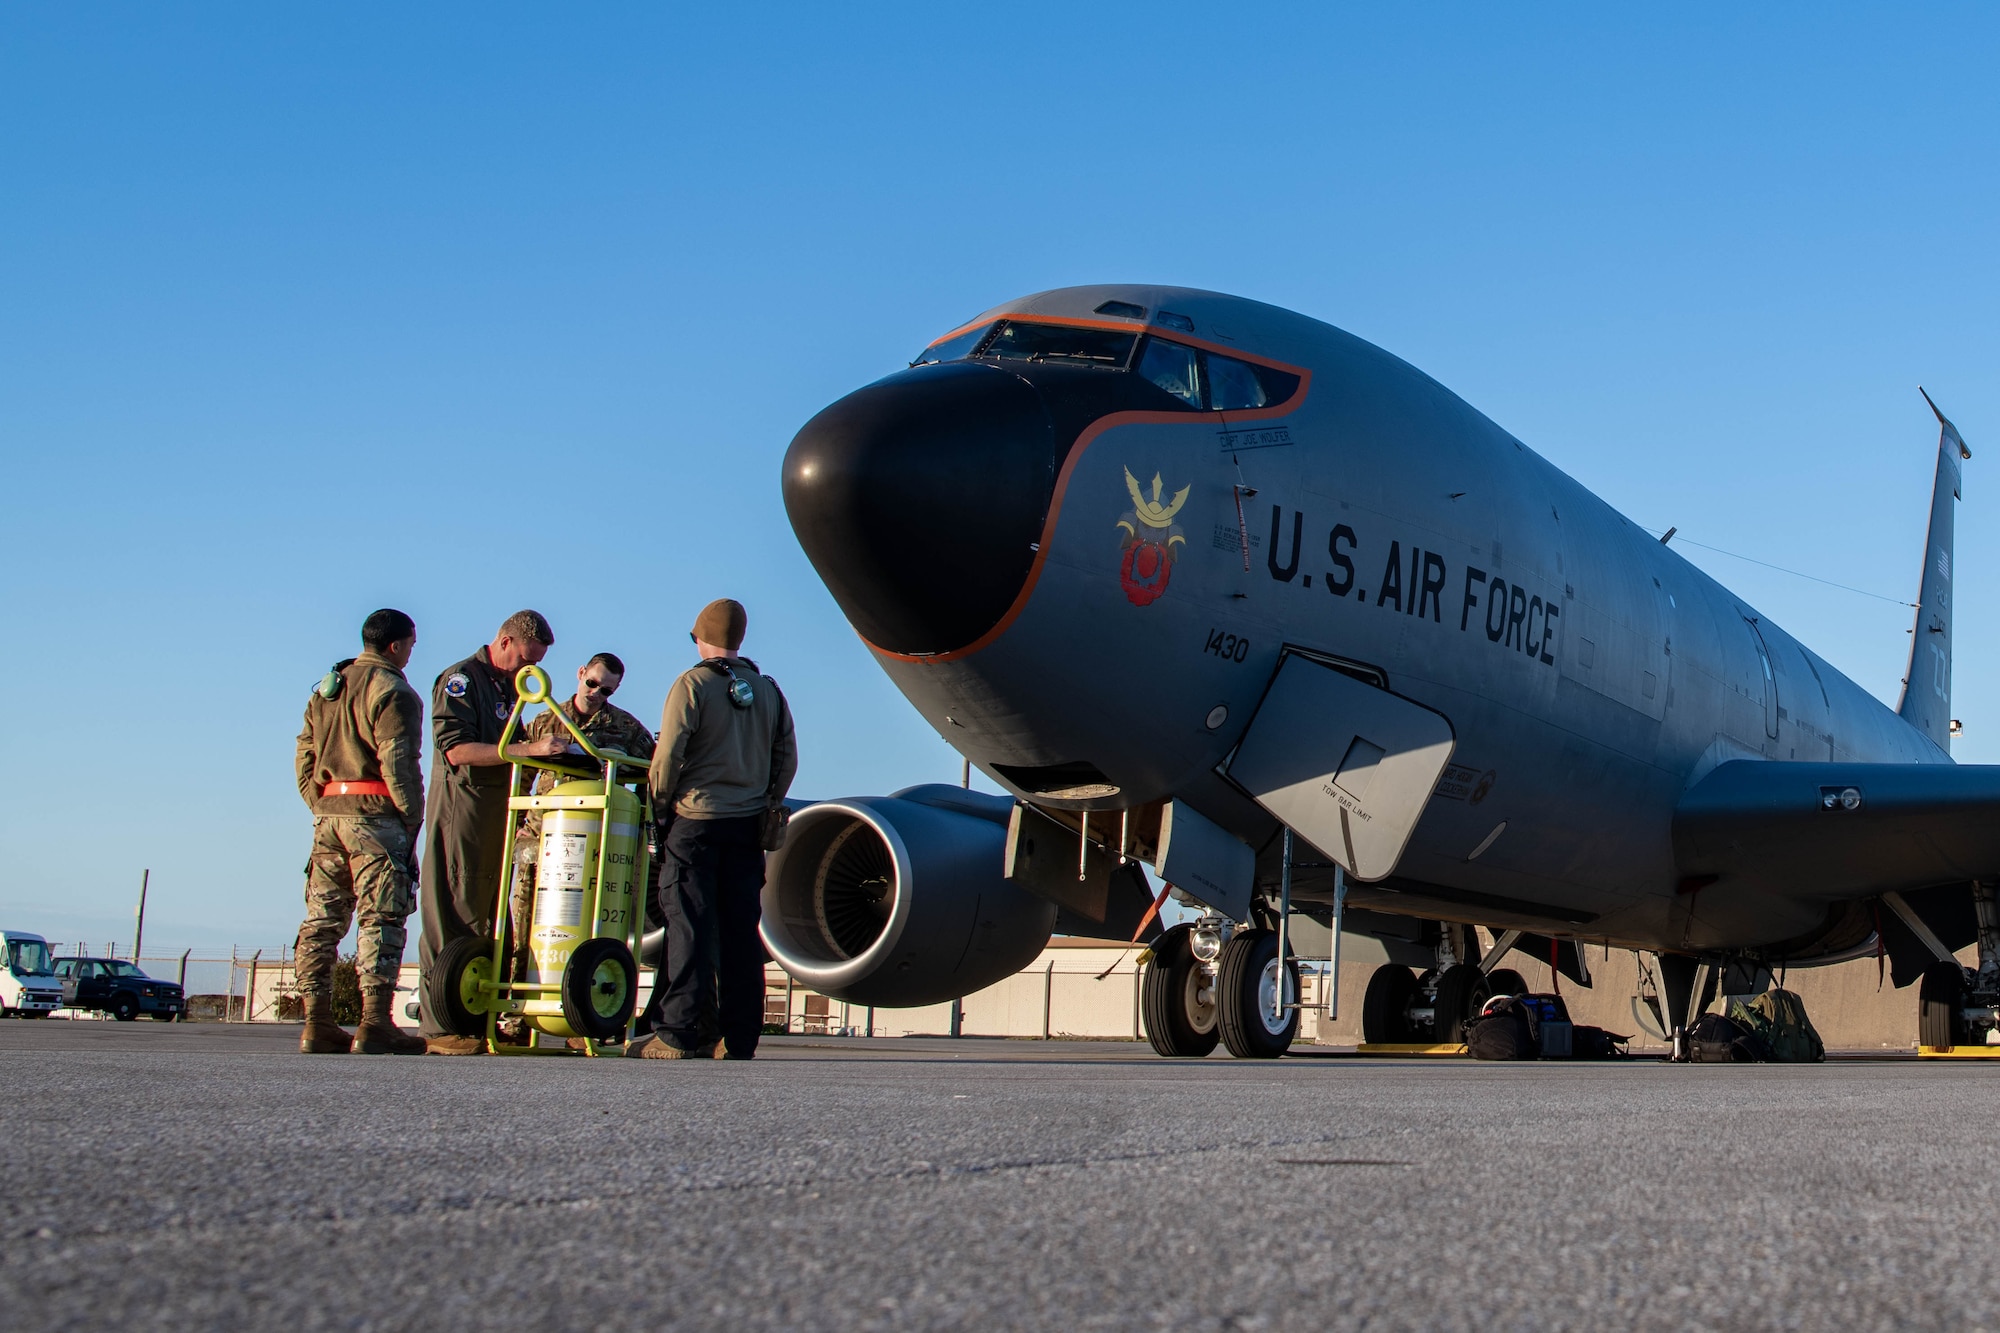 Airmen review materials in front of an aircraft.